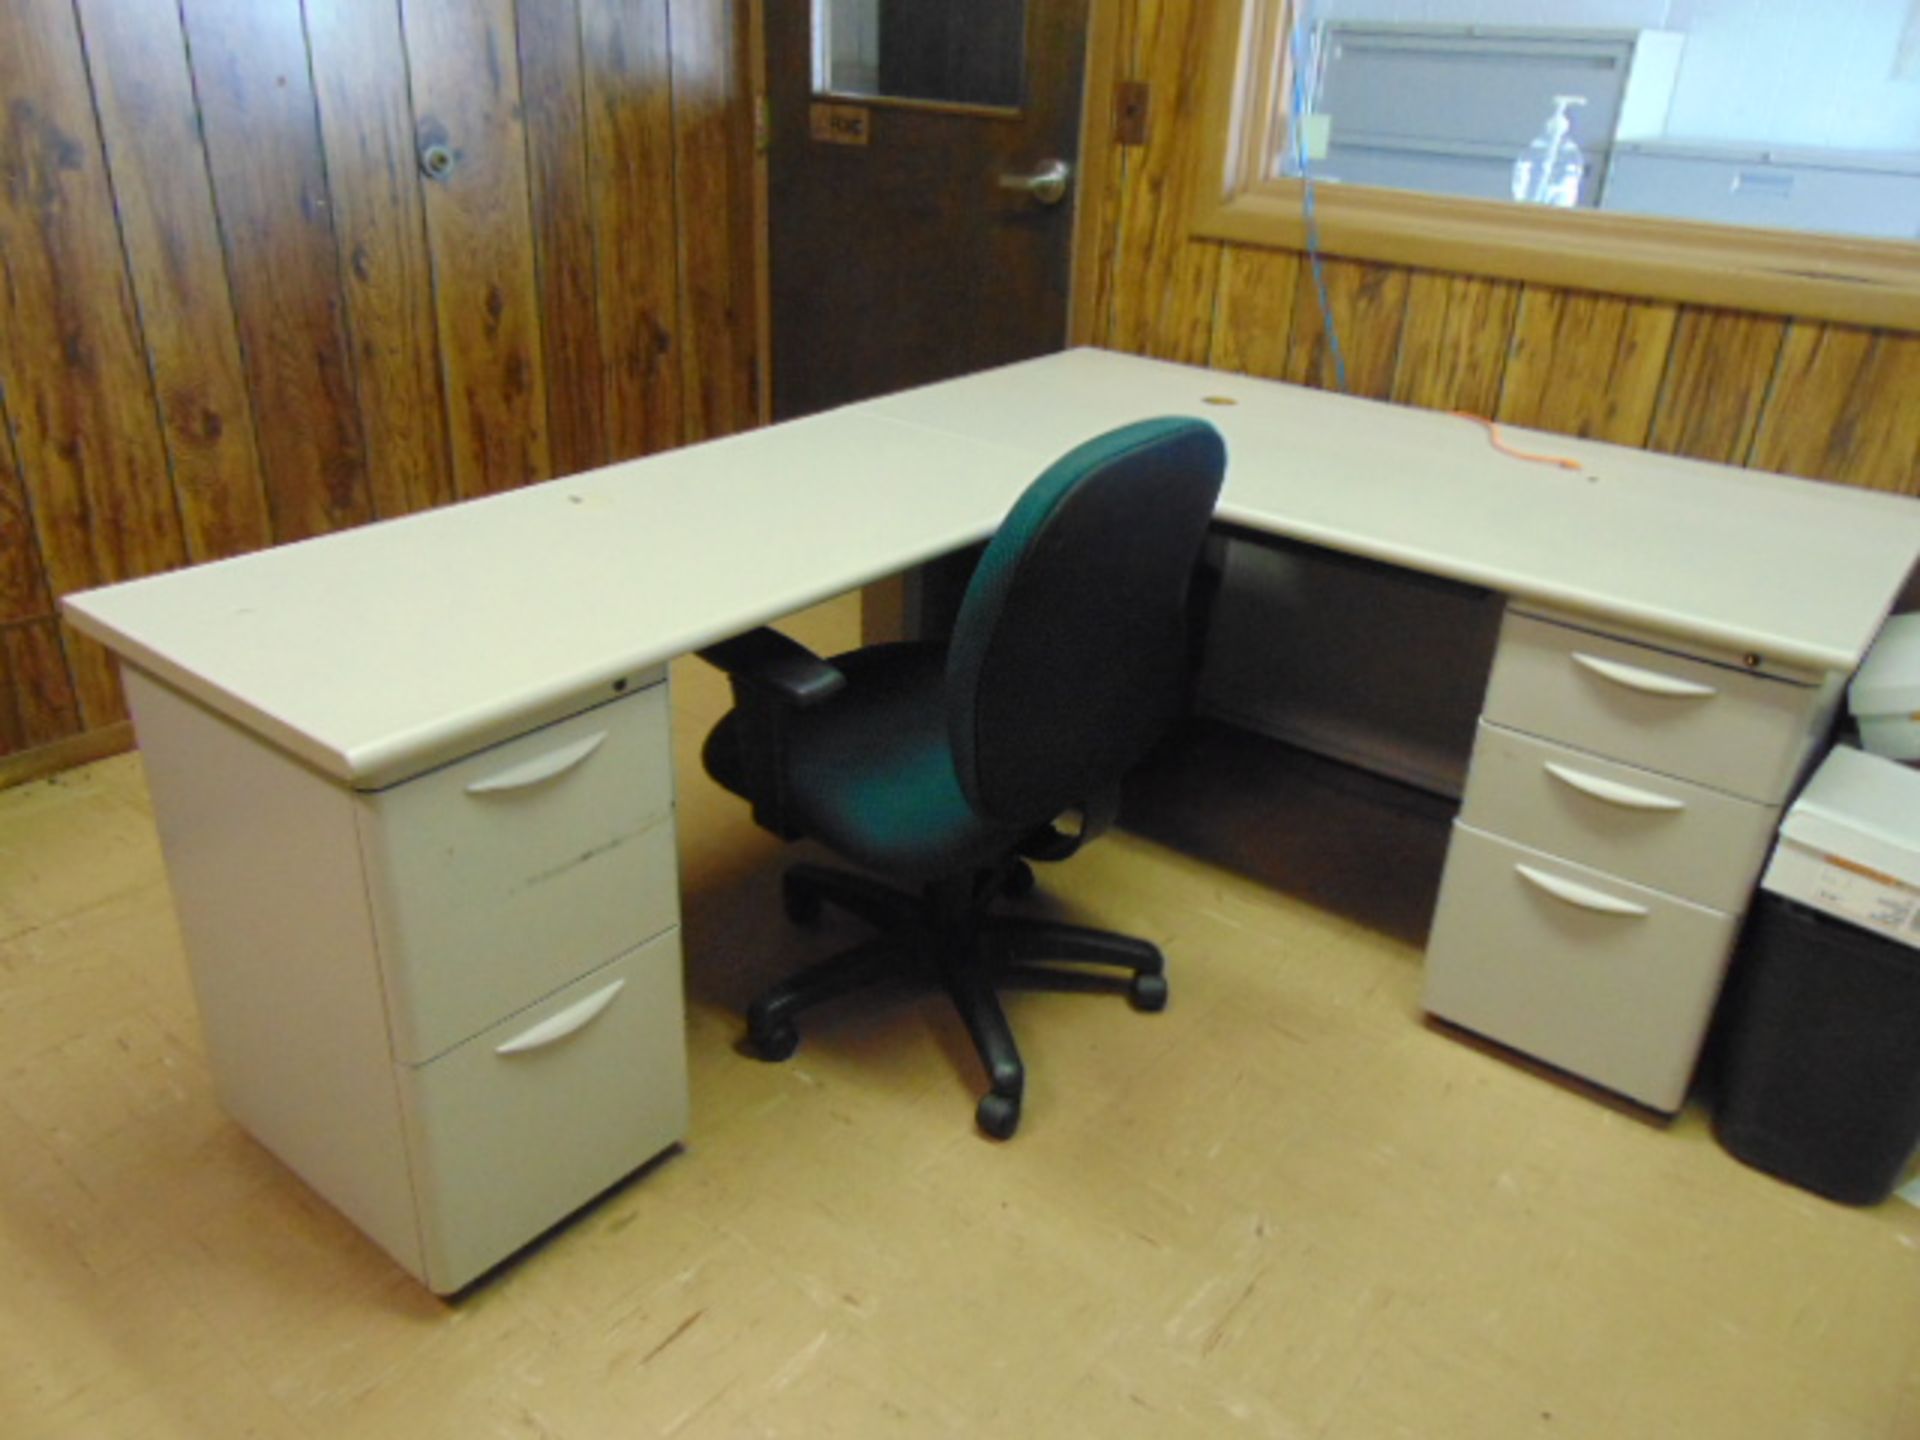 LOT CONSISTING OF: (2) L-shaped desks, (2) file cabinets & (2) chairs - Image 3 of 3